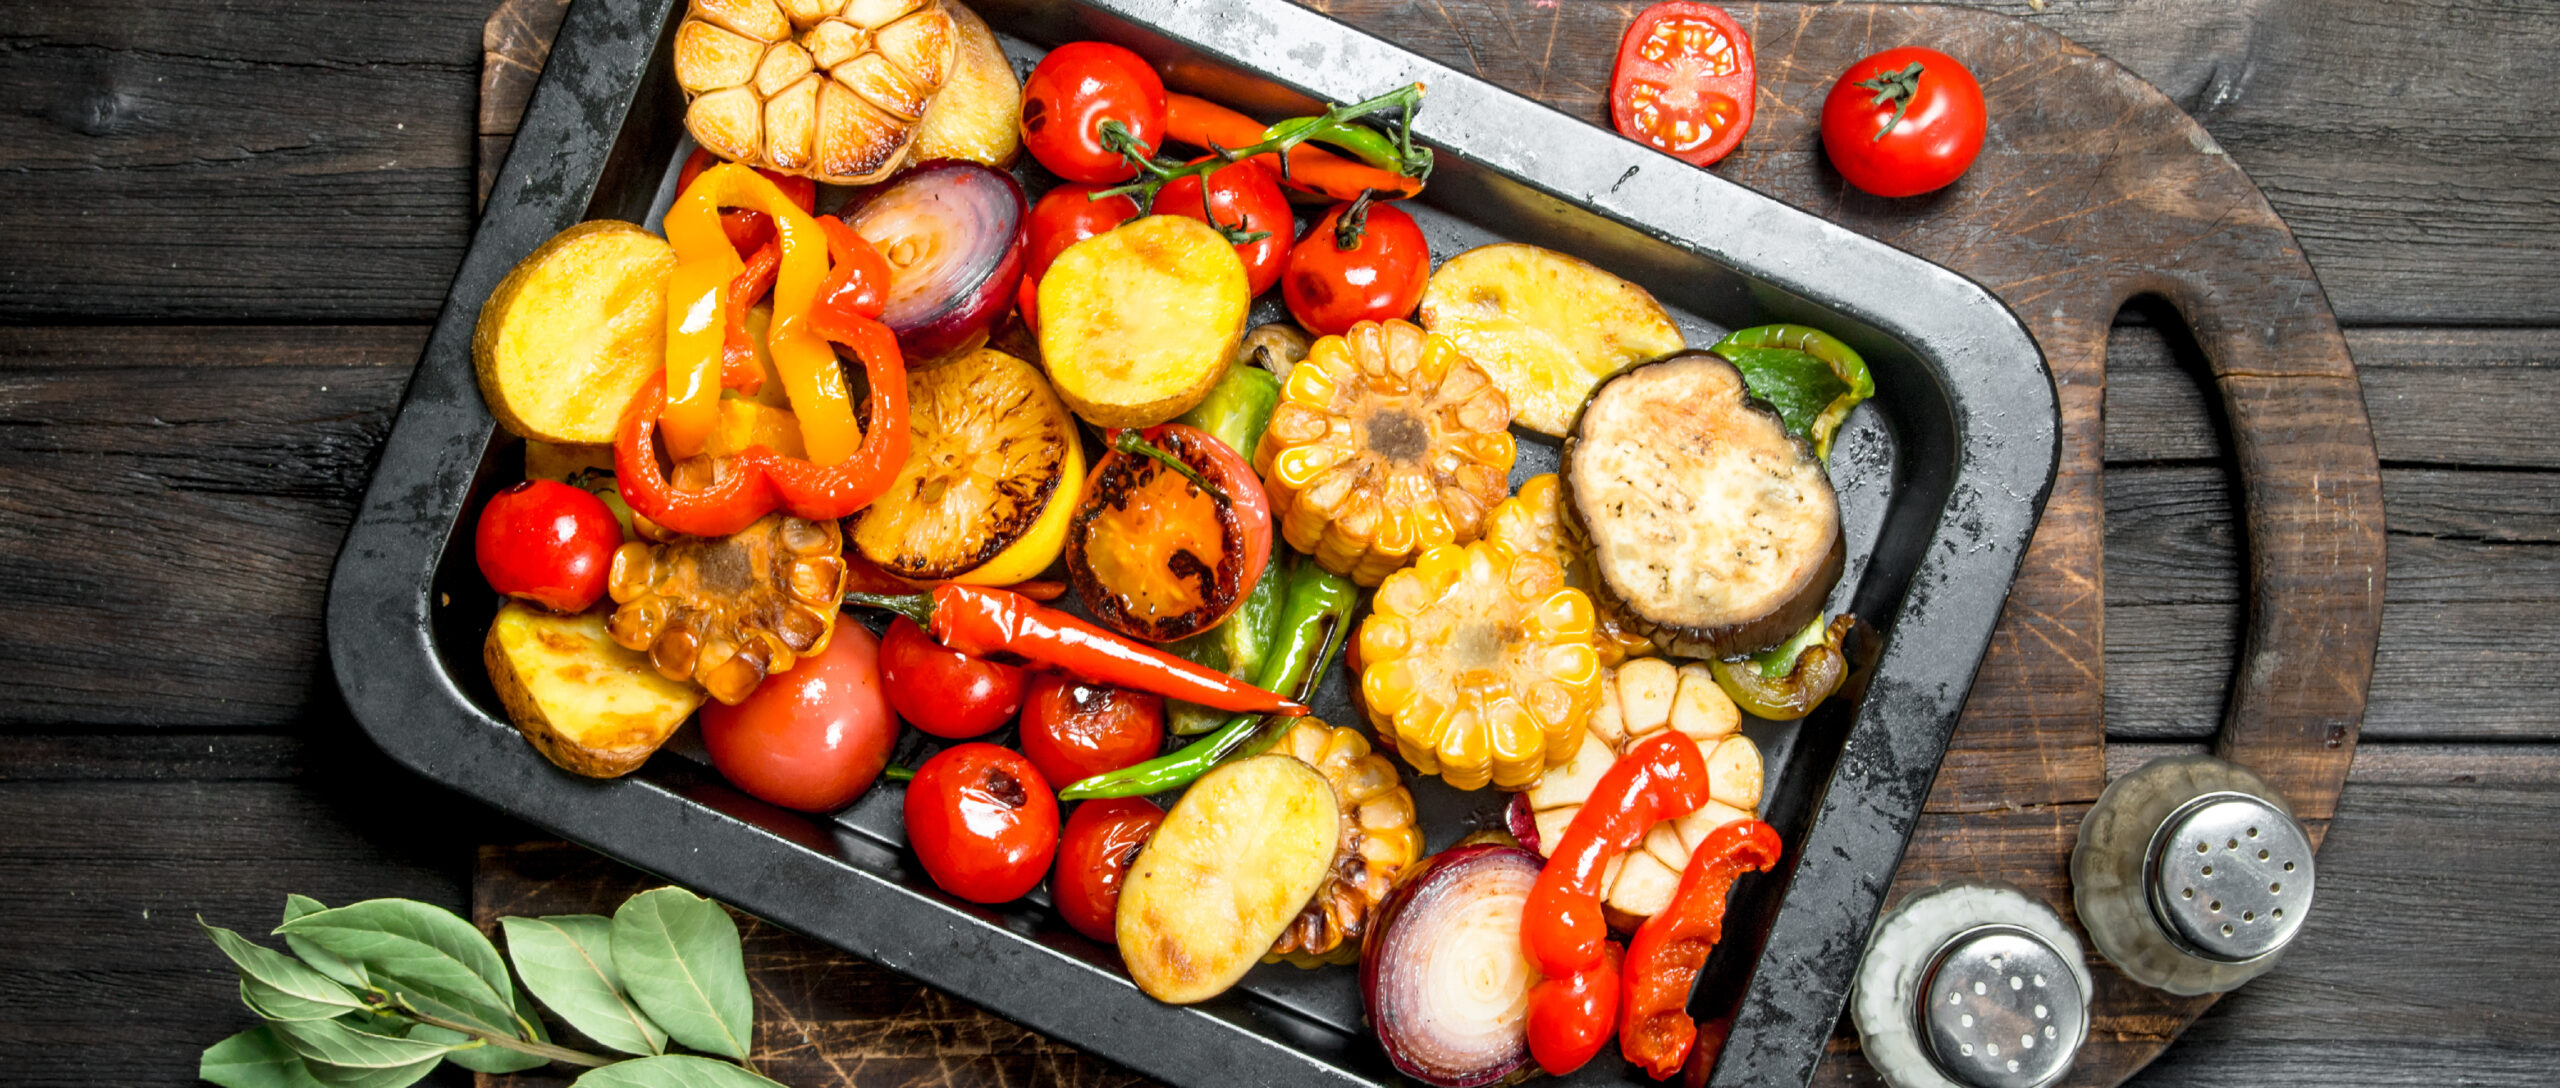 How to Make a Sheet Pan Meal